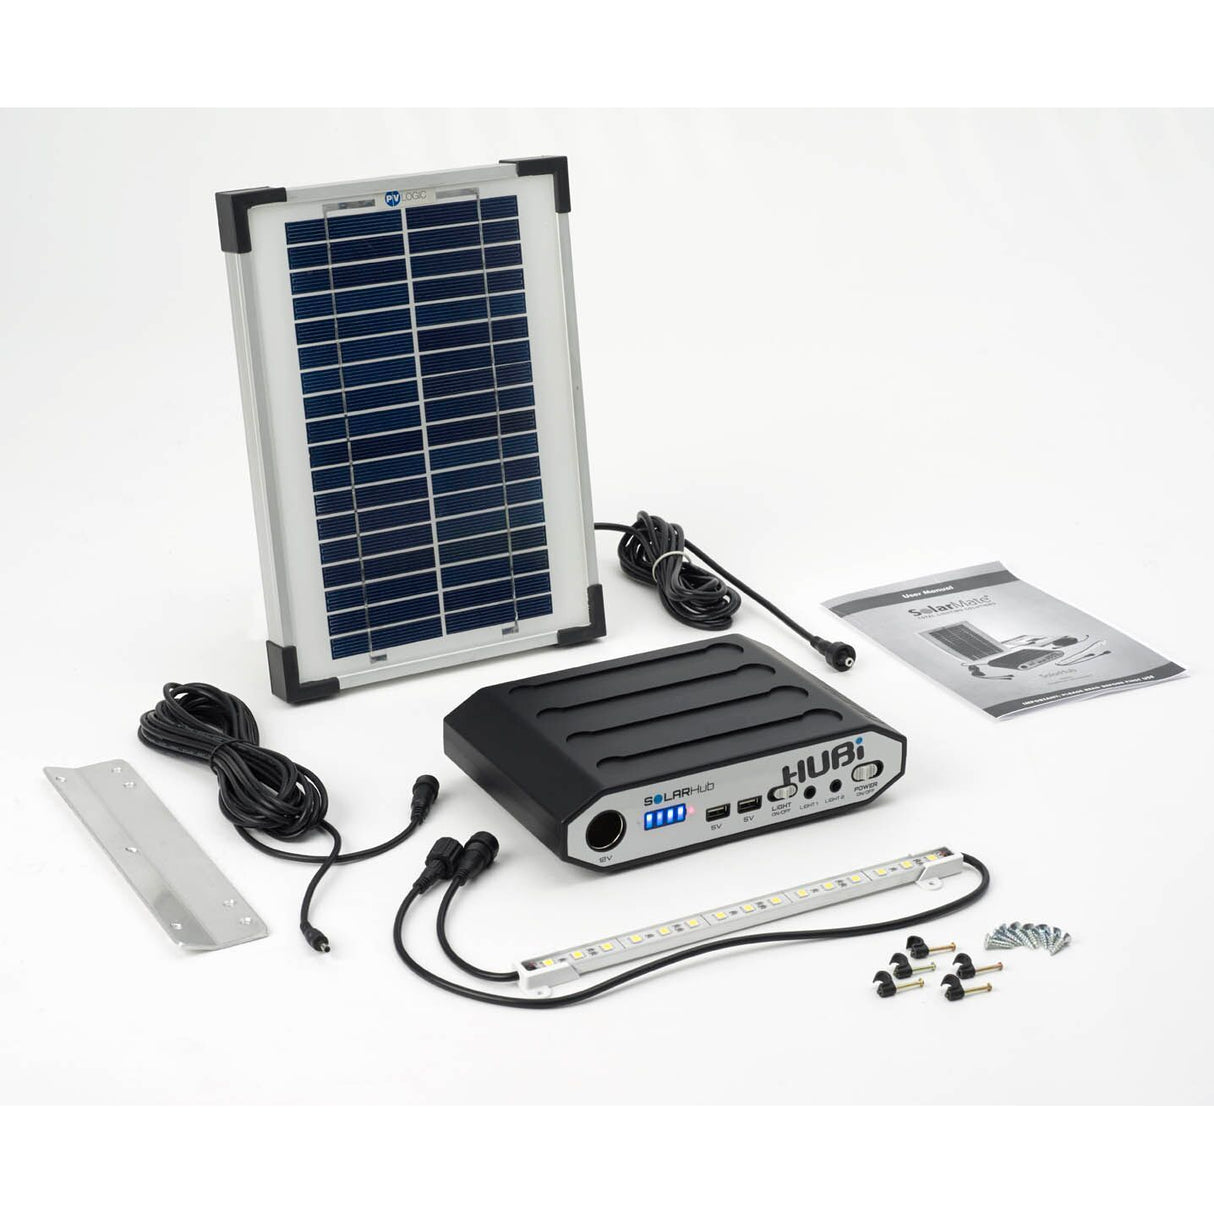 Kit complet Hub solaire 16